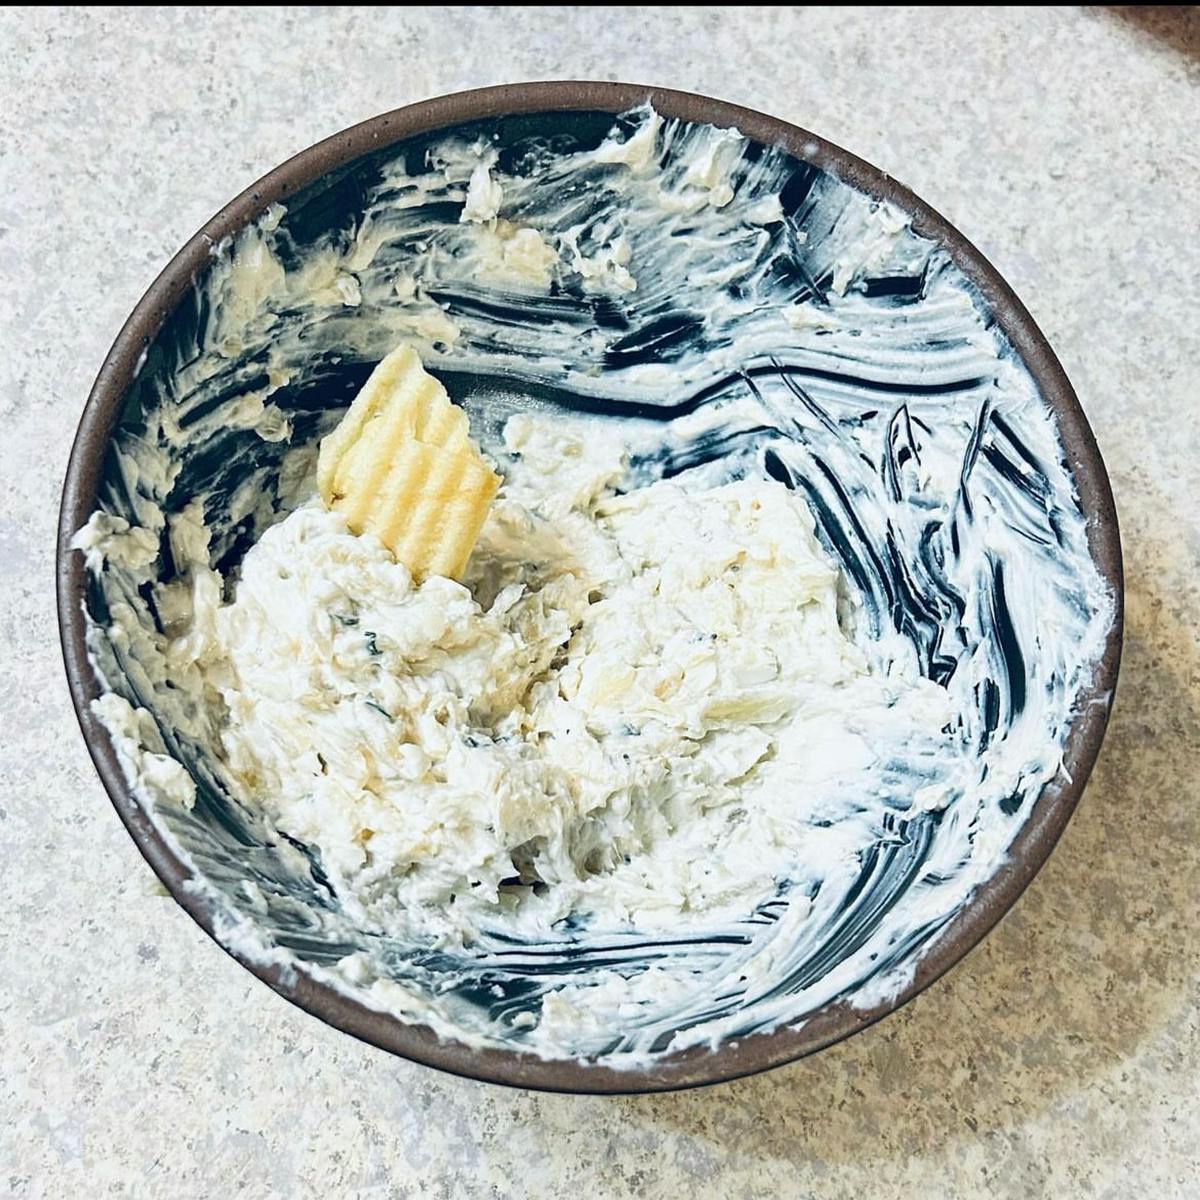 Onion dip in a blue bowl with a chip